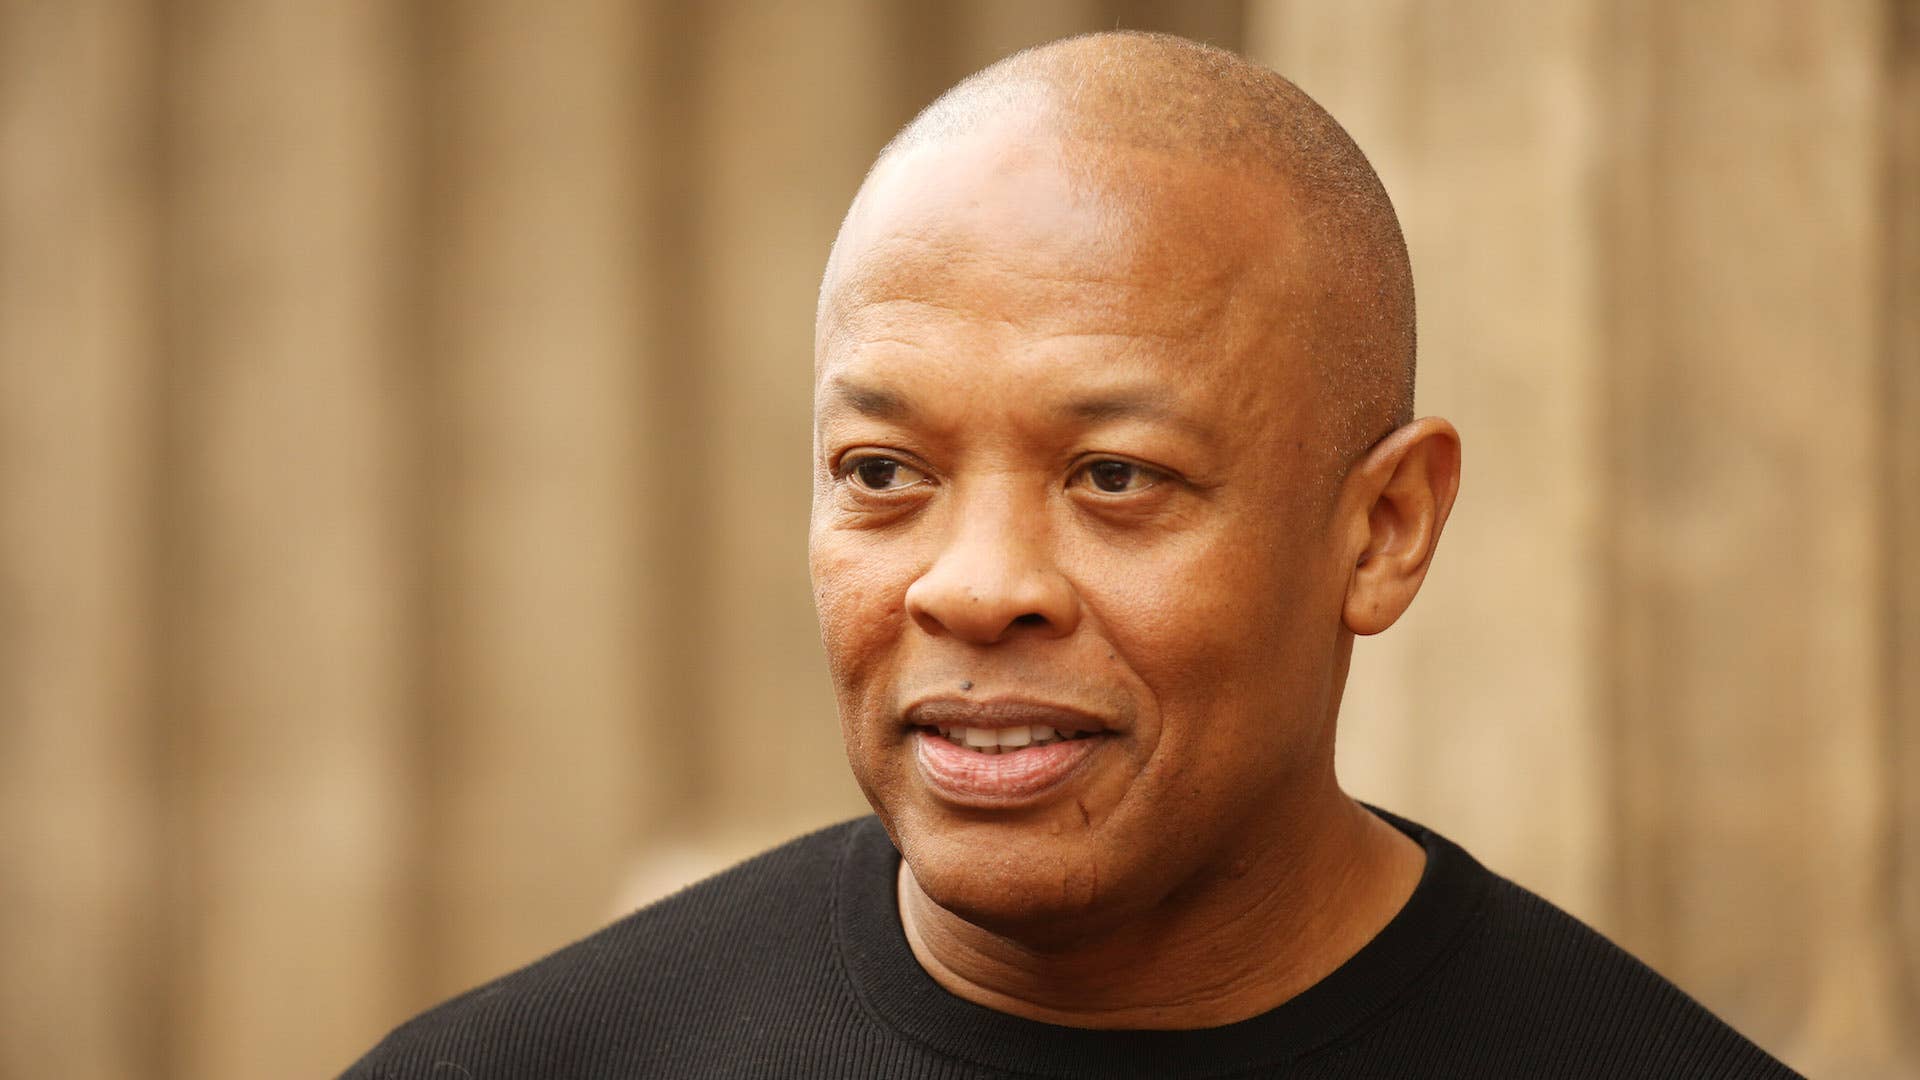 Dr. Dre attends the ceremony honoring Snoop Dogg with a Star